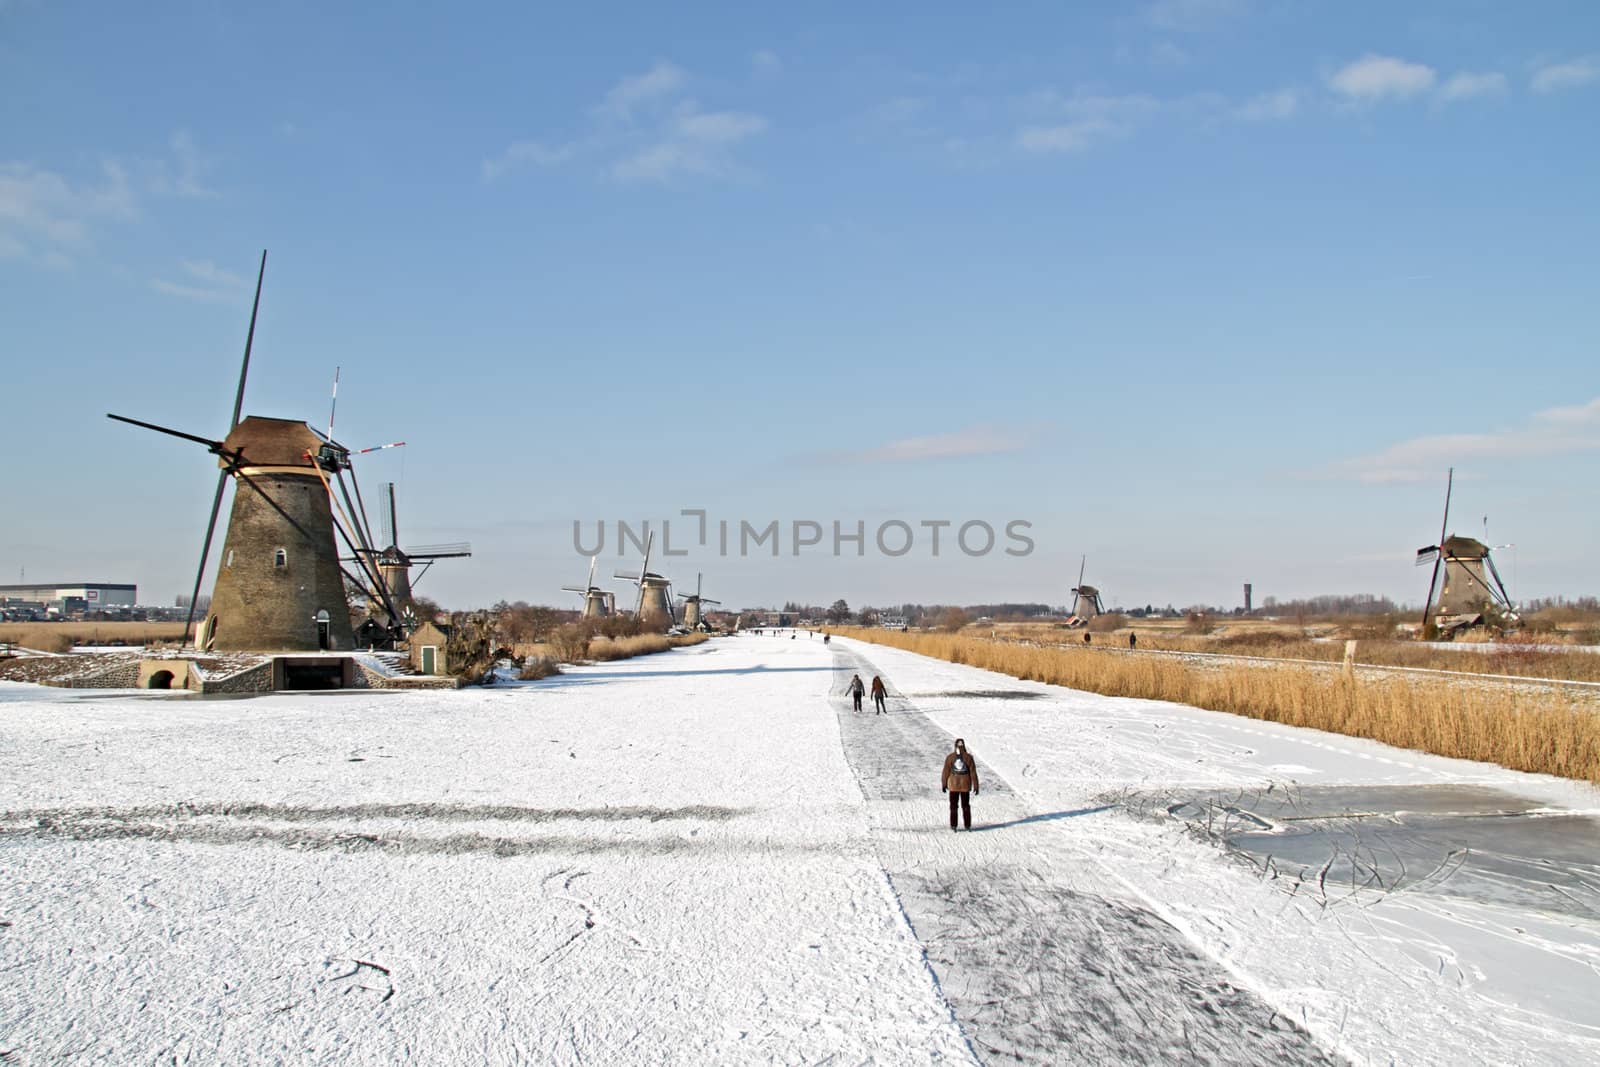 Ice skating at Kinderdijk in the Netherlands by devy